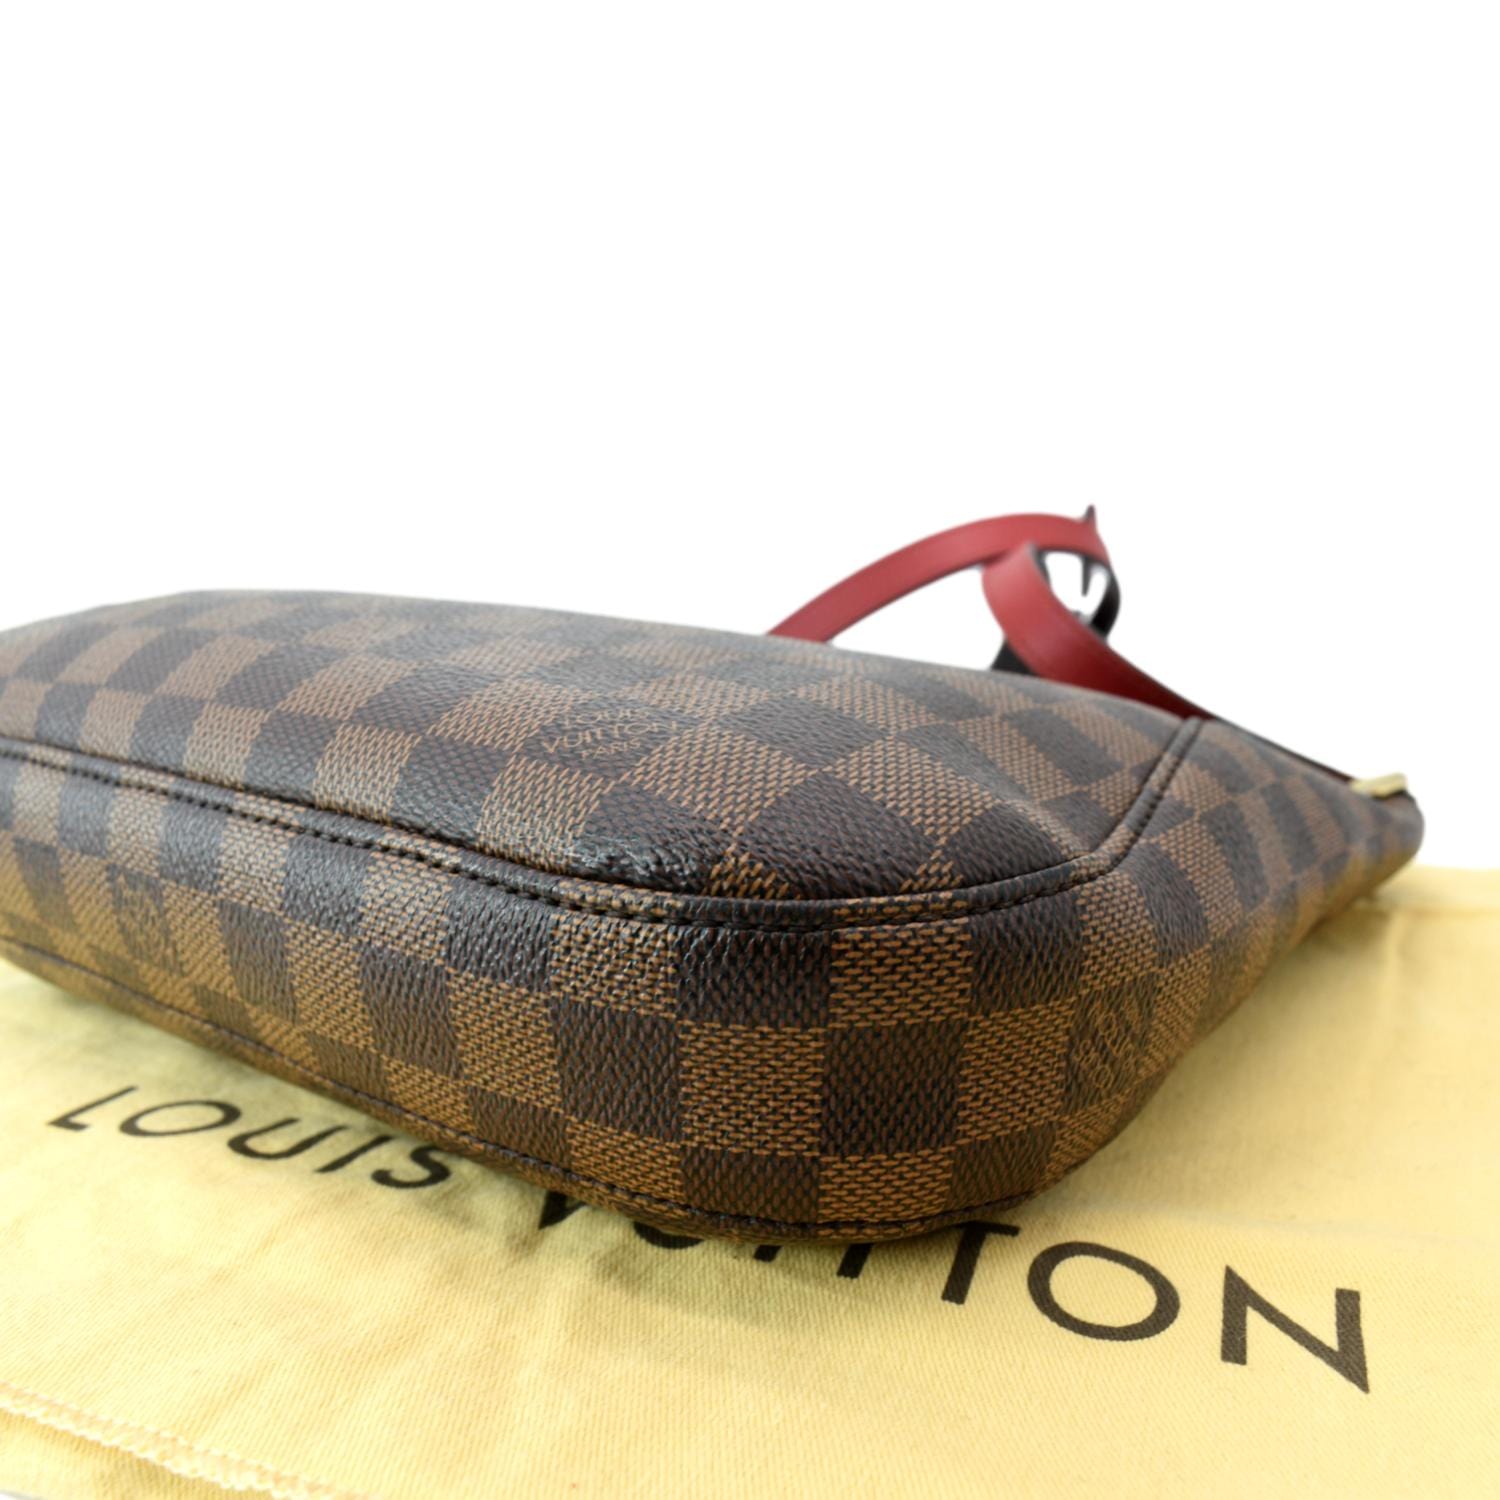 LOUIS VUITTON Damier Ebene South Bank Besace - clothing & accessories - by  owner - apparel sale - craigslist